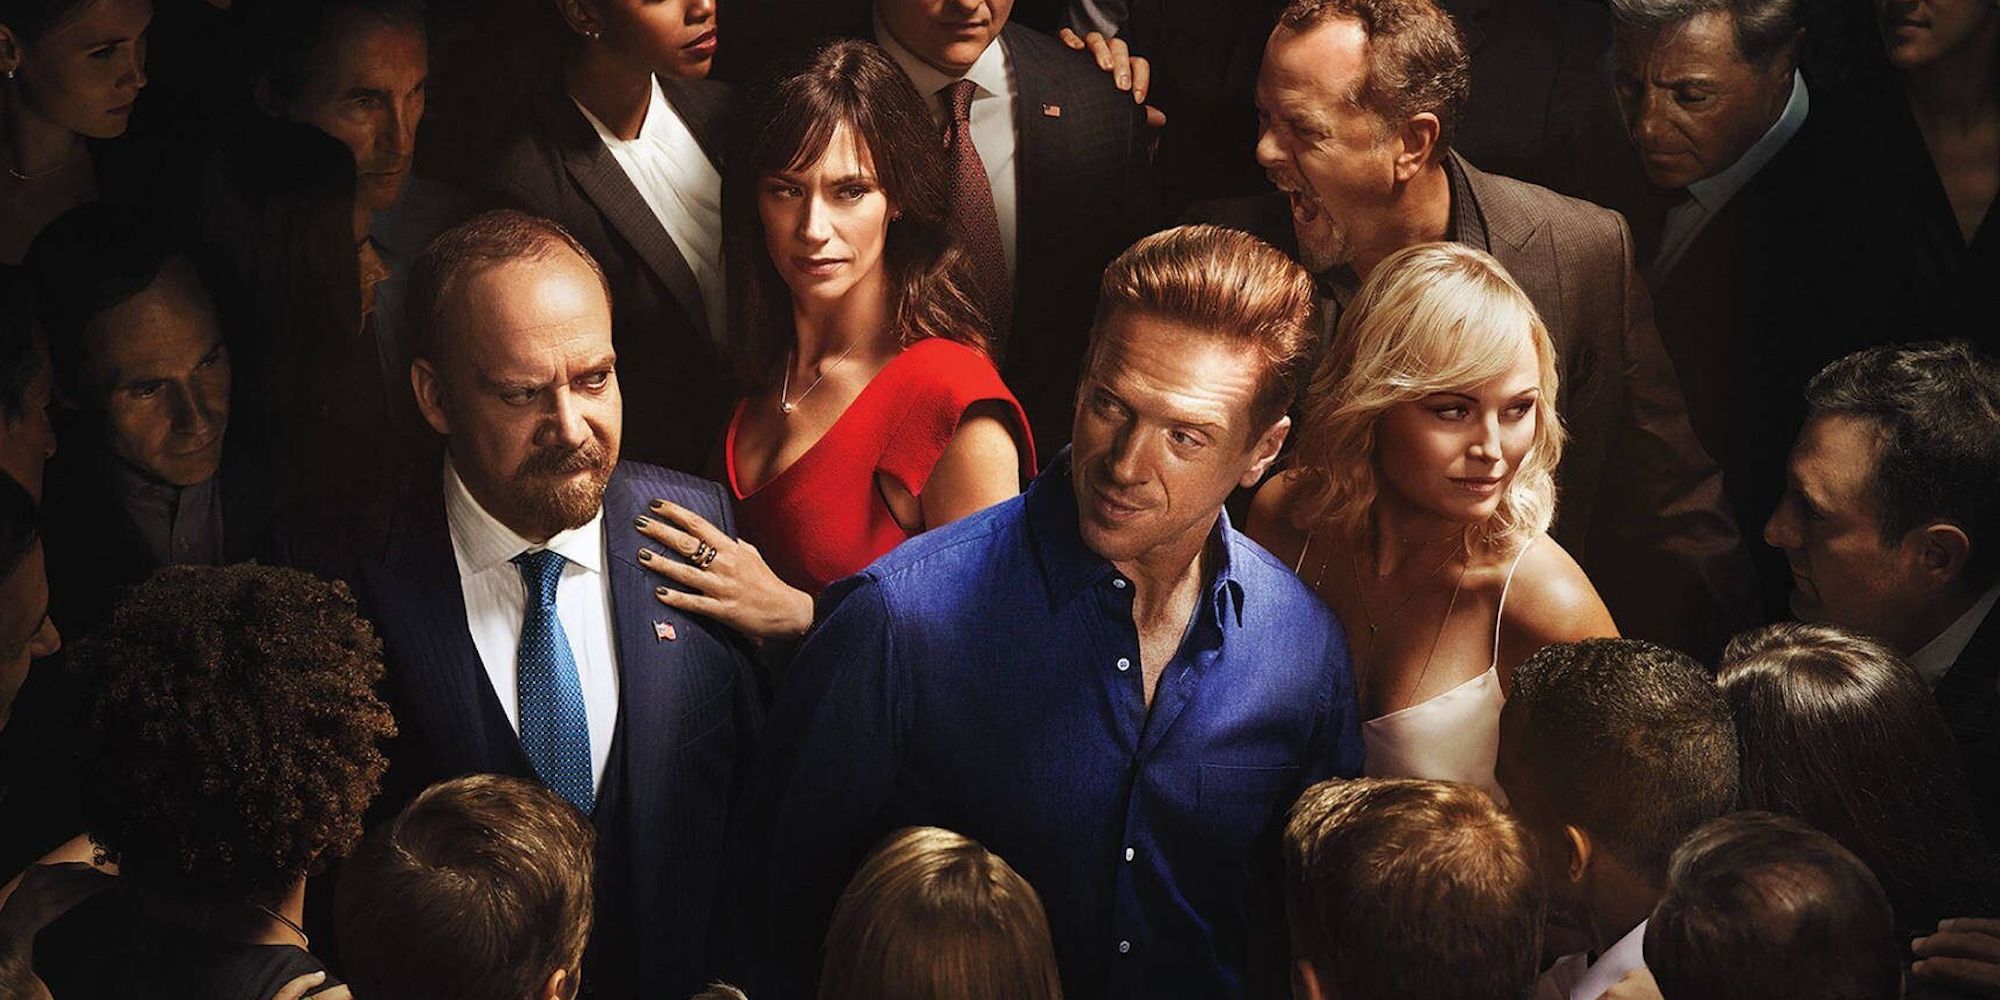 The main cast of Billions among a crowd.